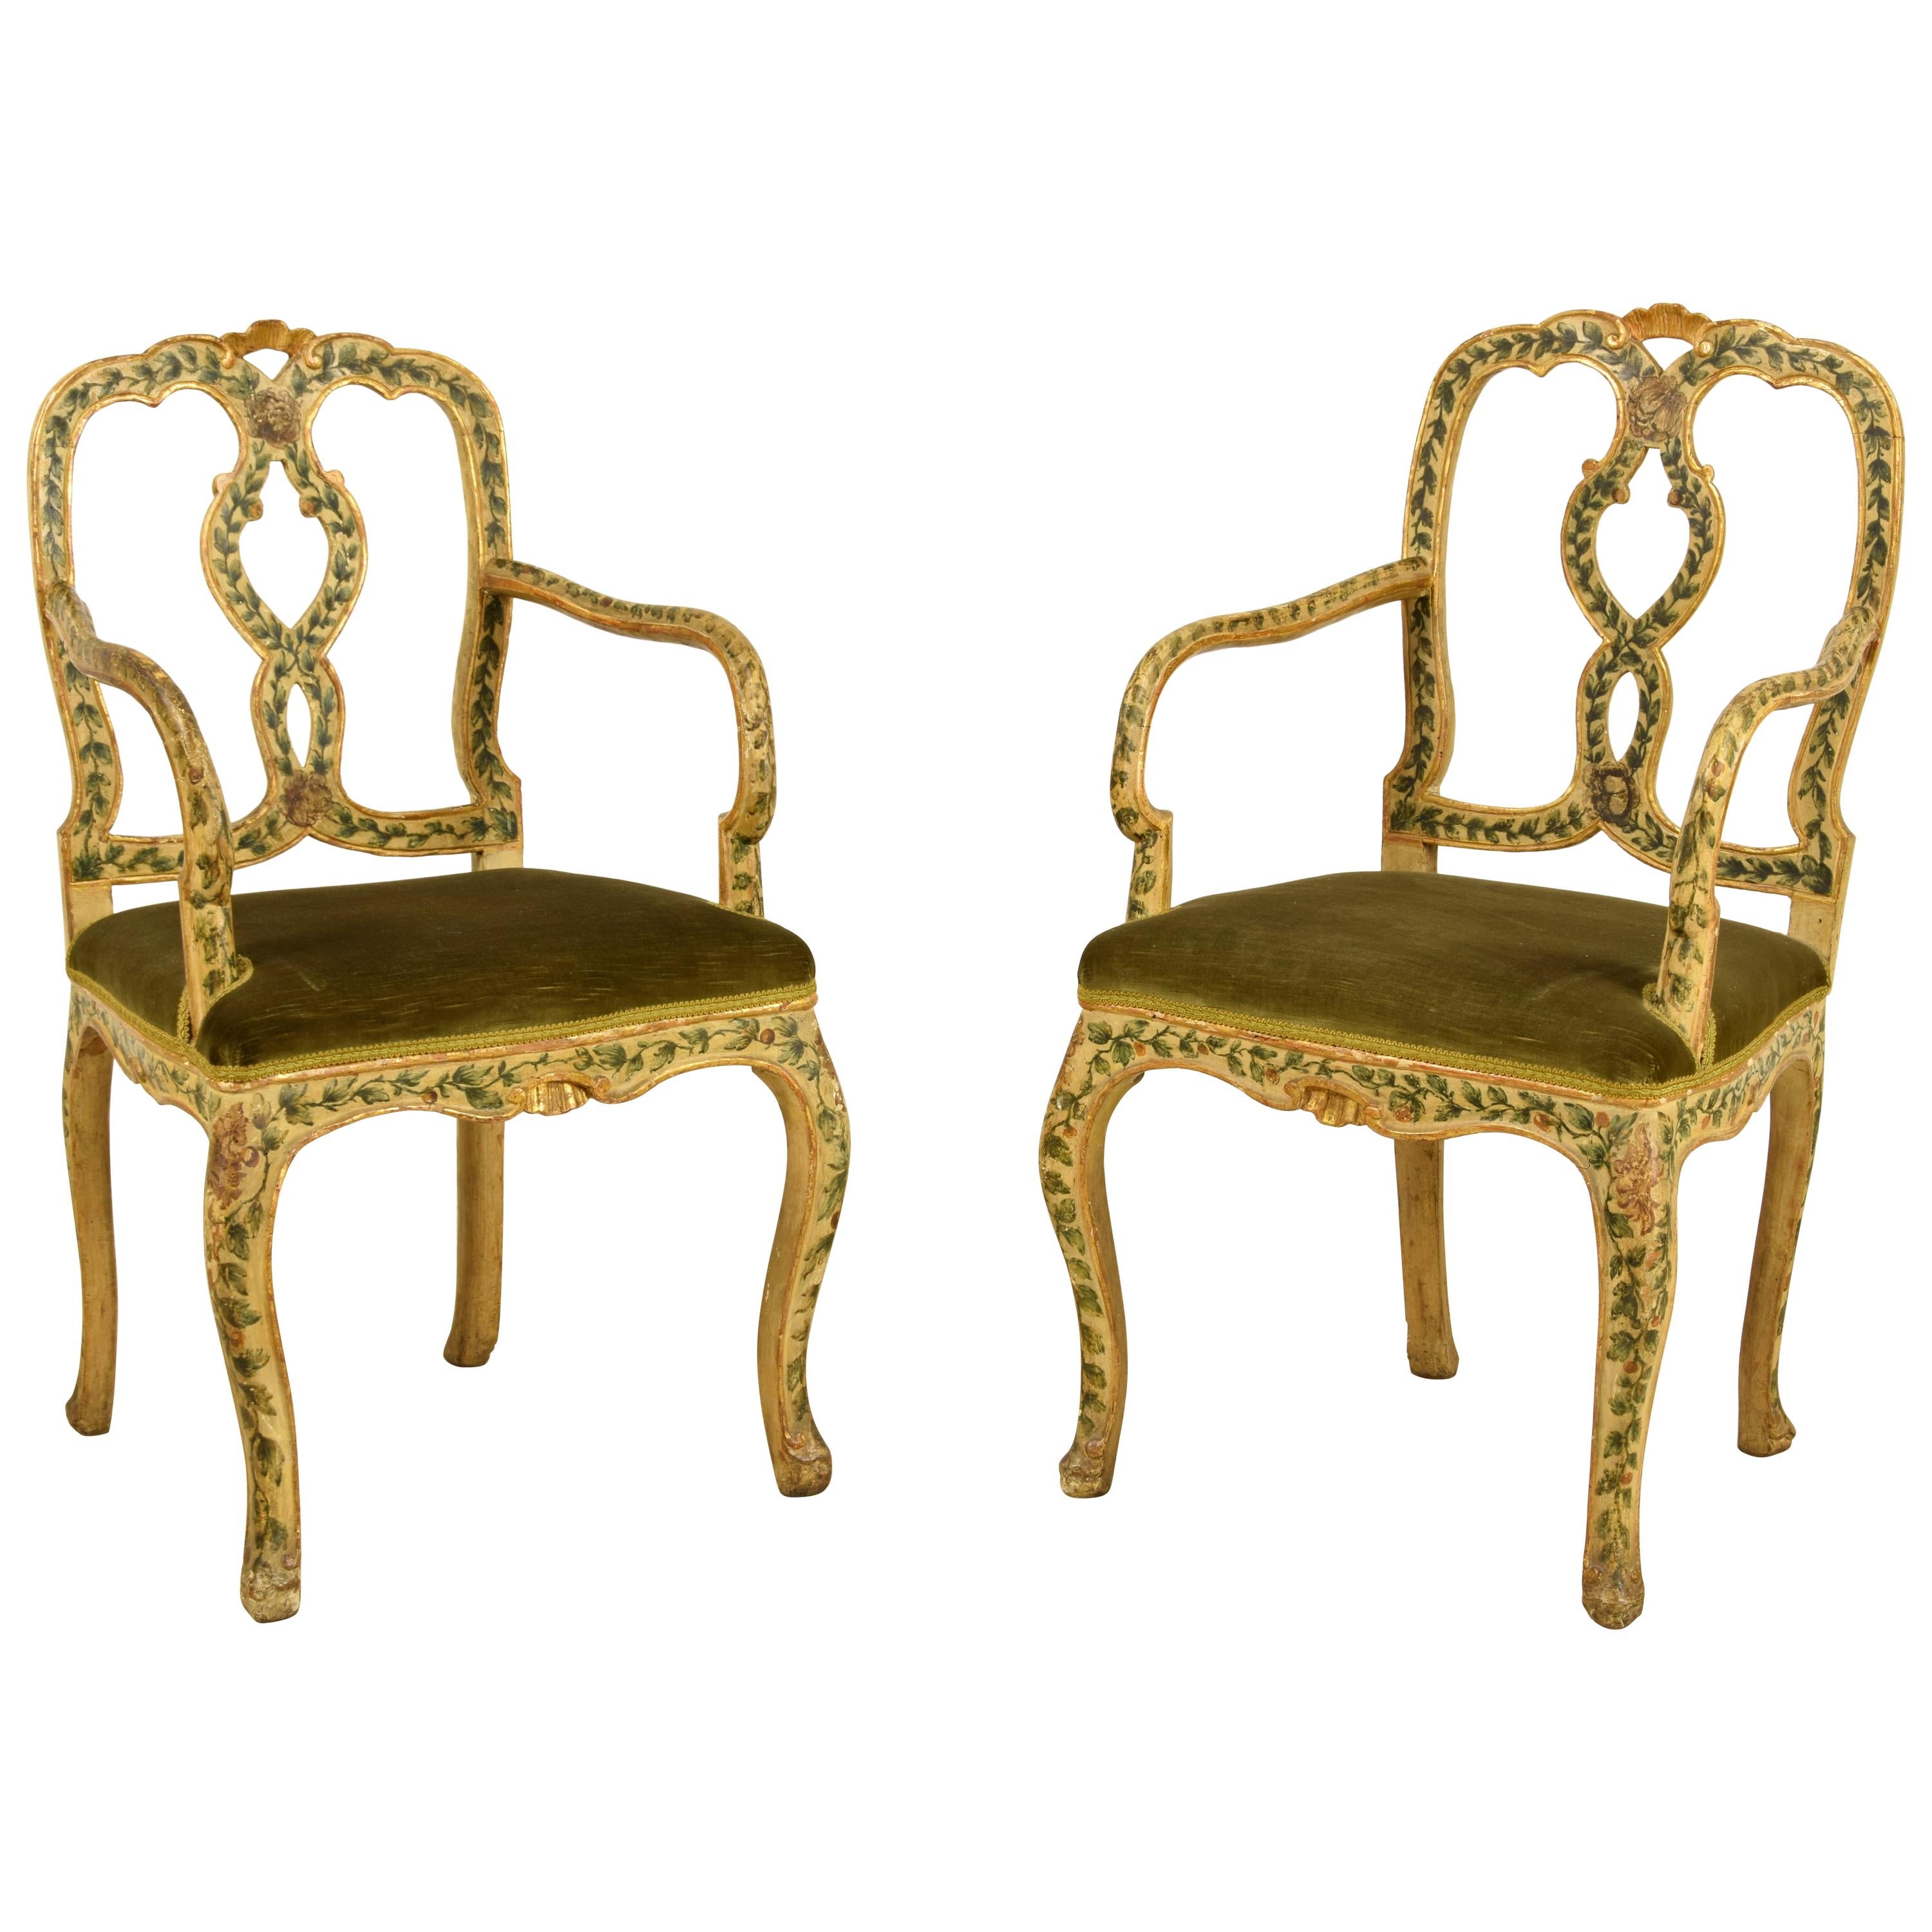 18th Century, Pair of Venetian Lacquered and Giltwood Armchairs